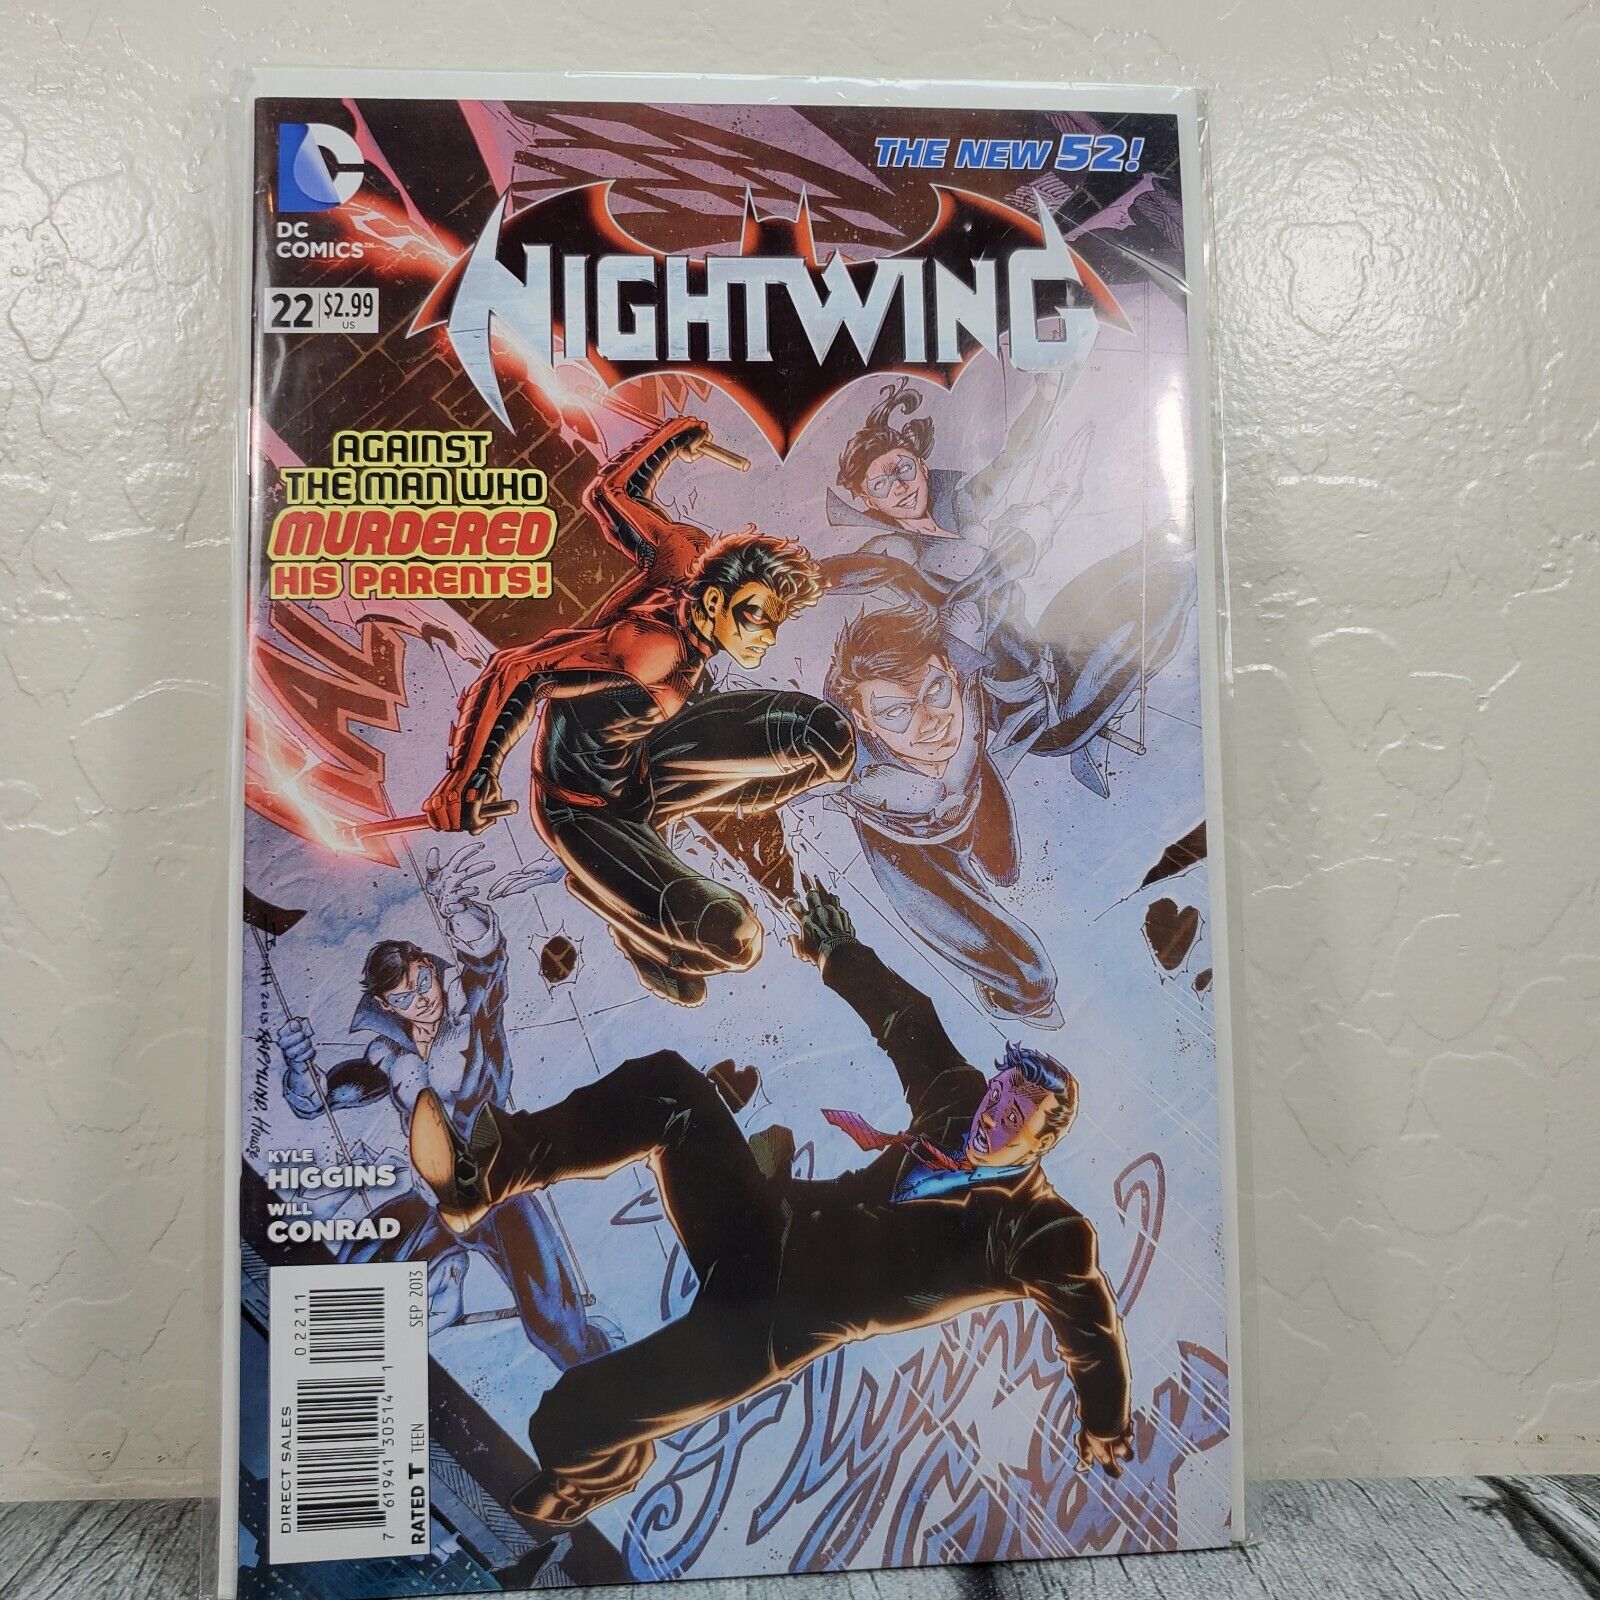 DC Comics The New 52 Nightwing #22 2013 Modern Comic Book Sleeved Boarded